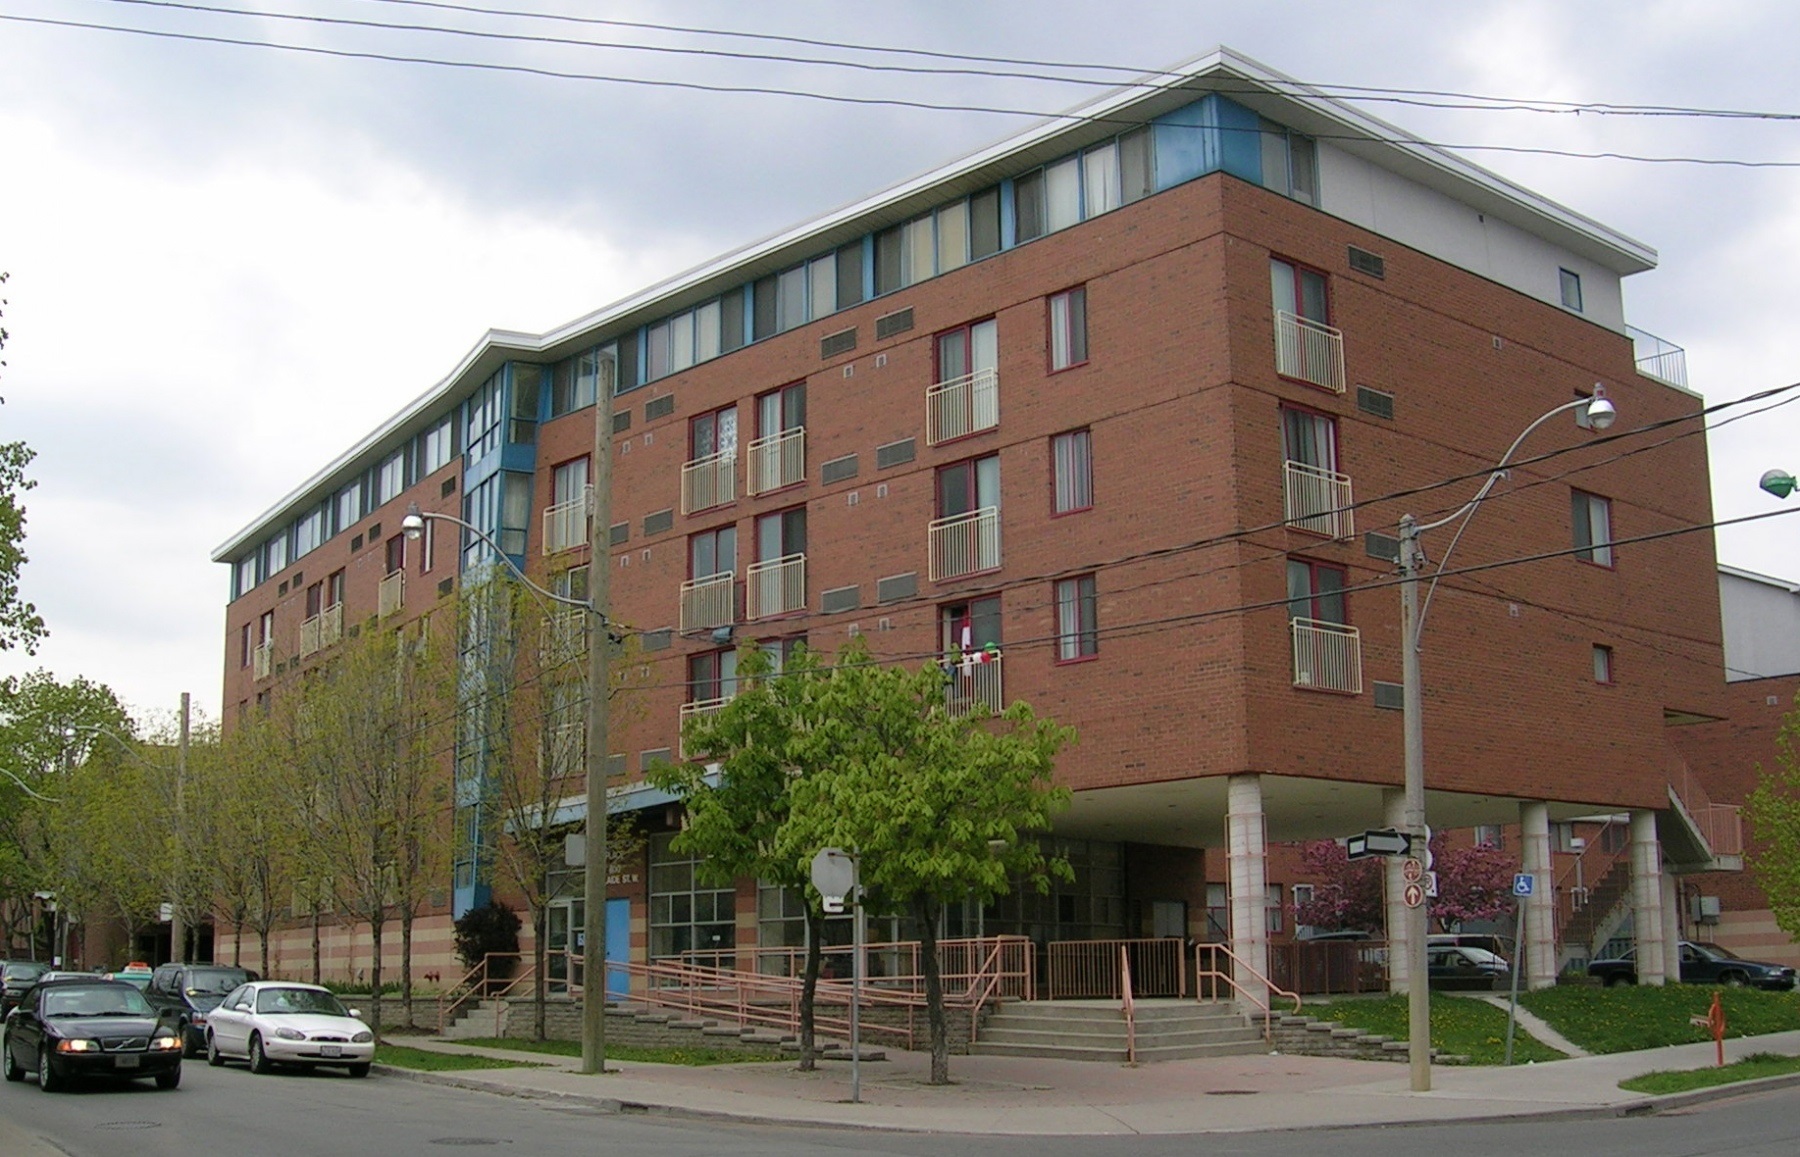 Meegwetch Place has 14 townhouses for families and 50 bachelor, one and two-bedroom apartments. Occupying a small block in the west-end of Toronto, residents are part of a diverse and vibrant community that speaks 19 languages. “Meegwetch” means “Thank you” in the First Nations language of the Ojibway.